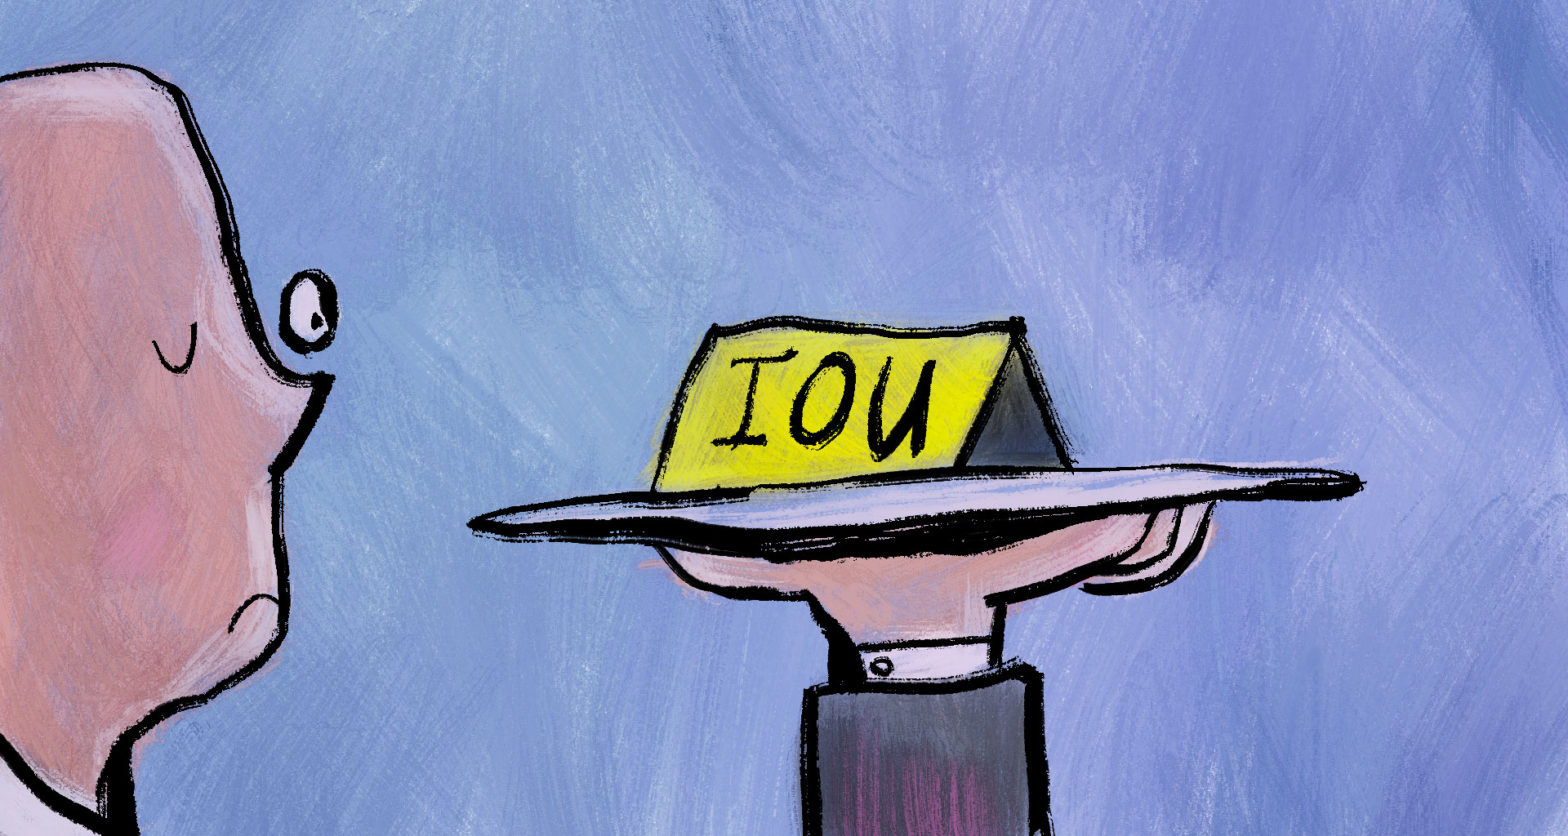 A waiter holding a tray up with a sign on it that says "IOU"